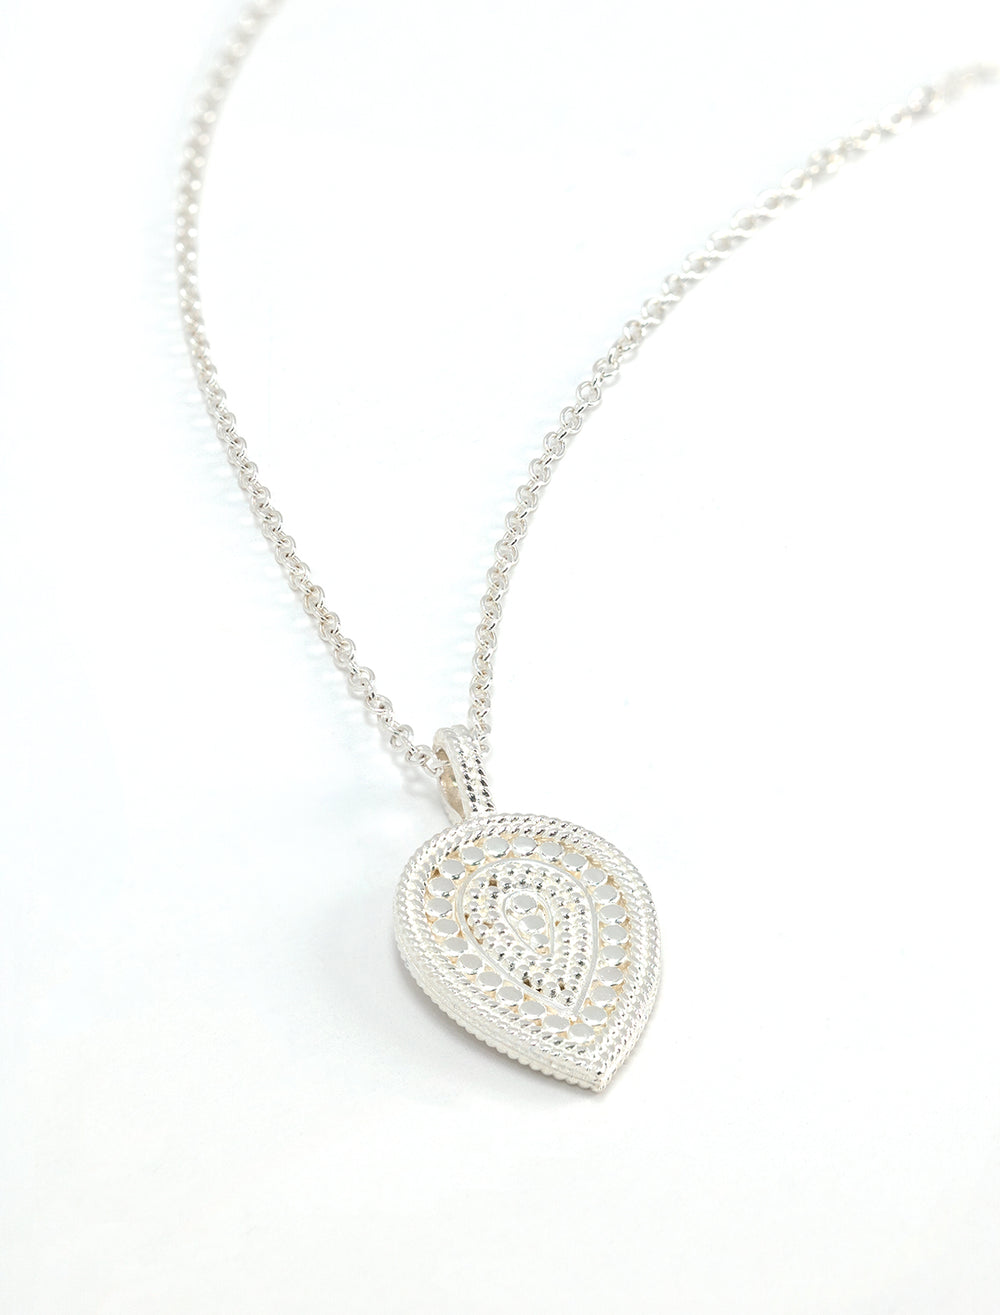 Stylized laydown of Anna Beck's beaded teardrop inverted pendant necklace in silver.